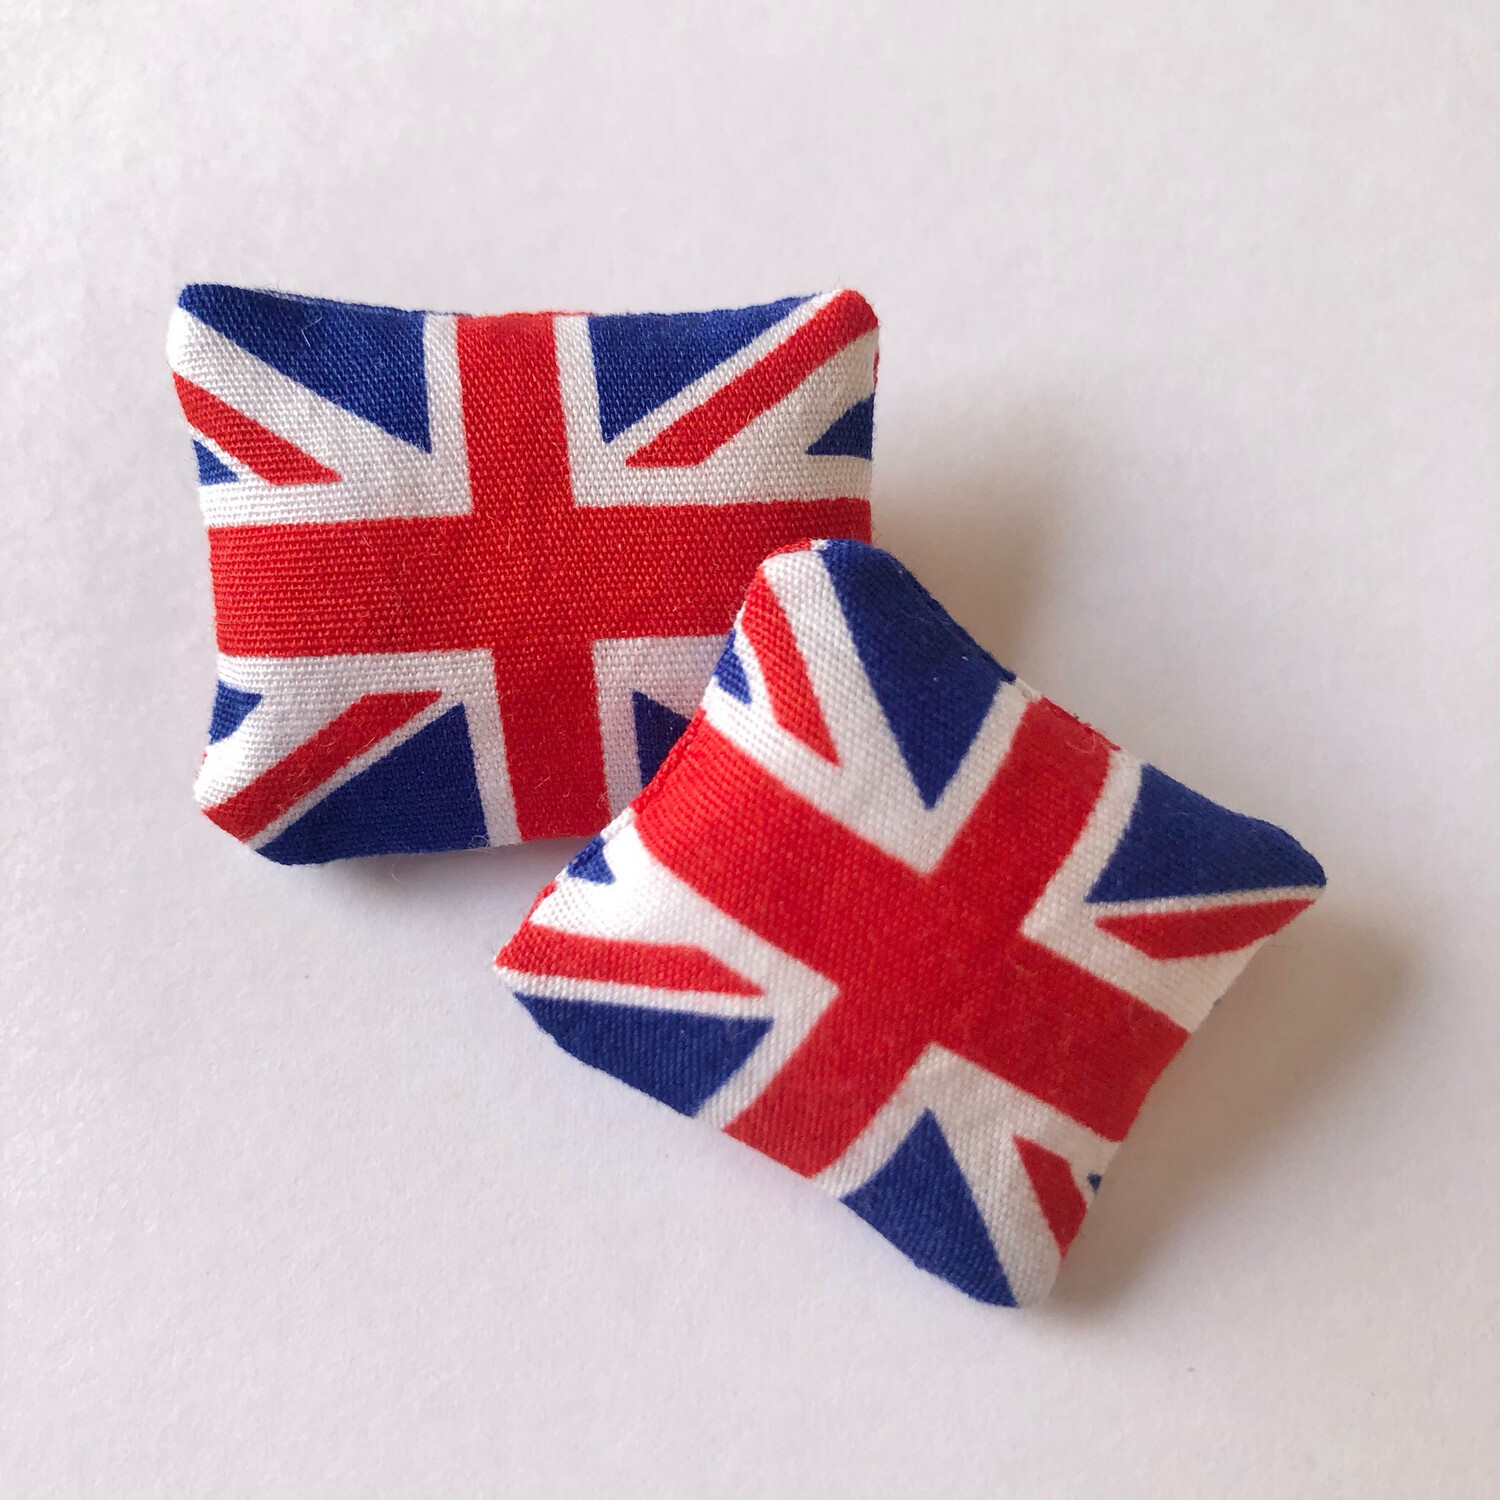 1:12 scale Set of 2 Union Jack Cushions for dolls house